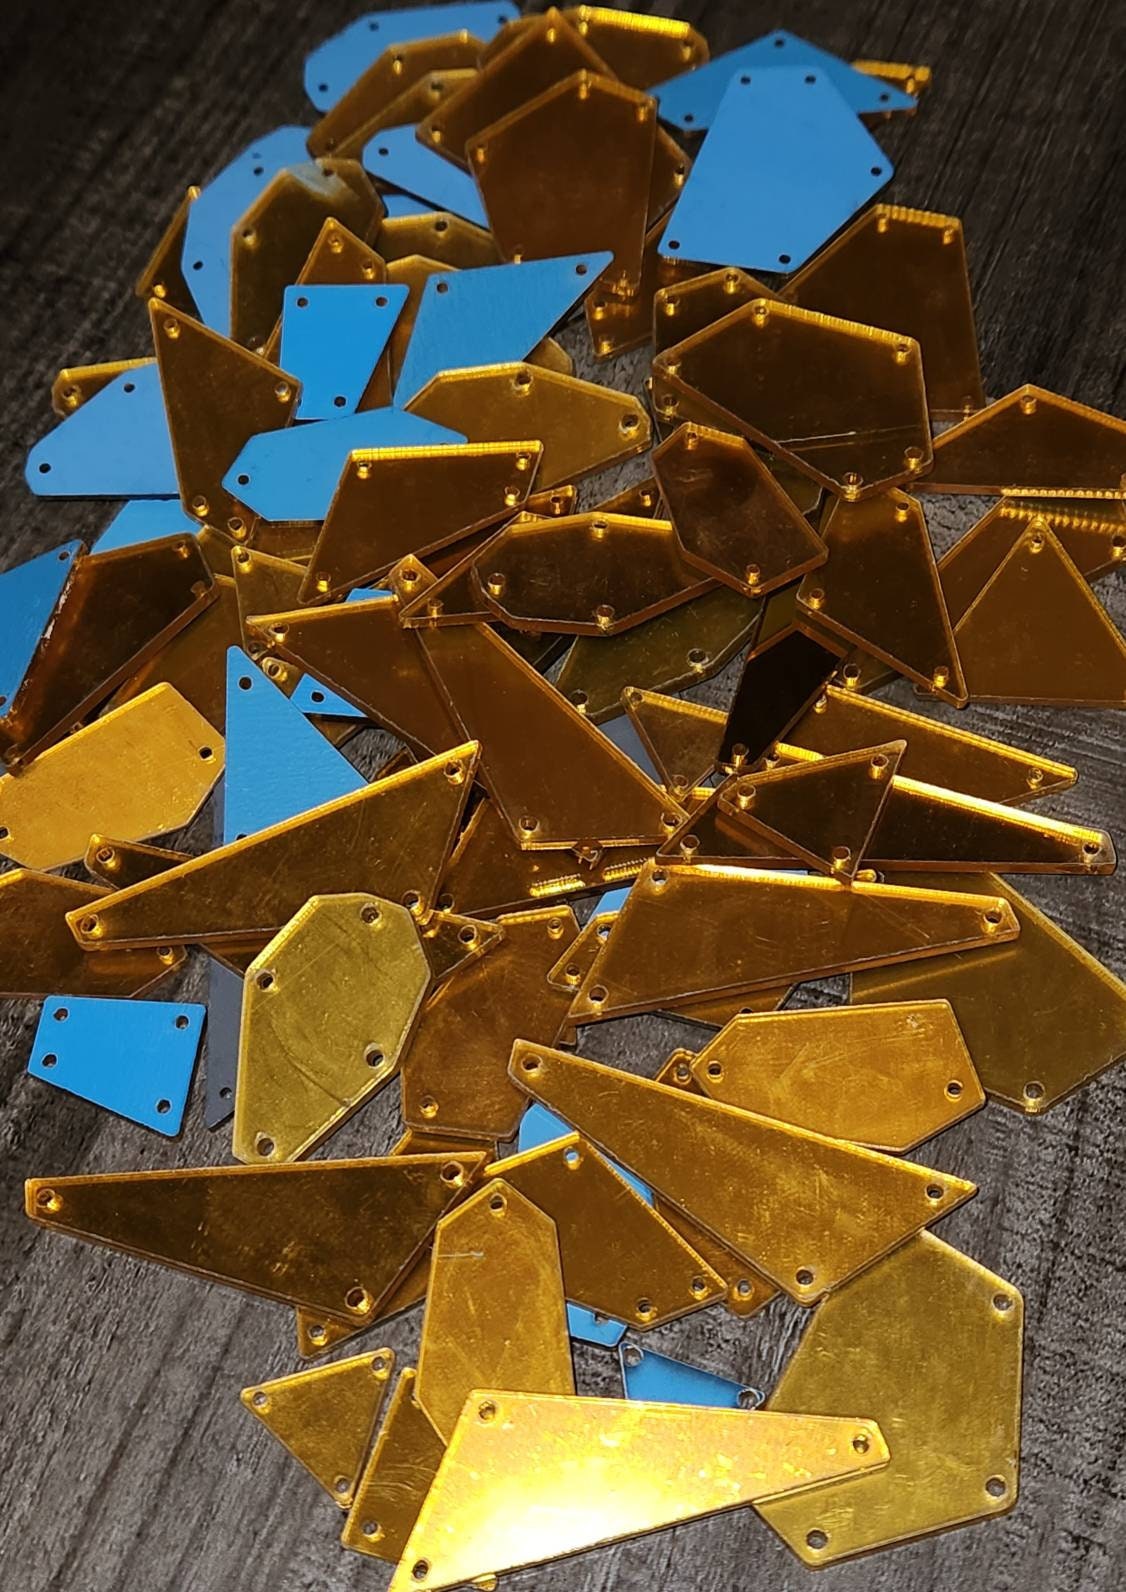 New: GOLD Mirror Studs, Flatback Sew or Glue On, For  DIY Fashion Projects, Tshirts, Jackets, Hats, Dresses, and more! Embellishments